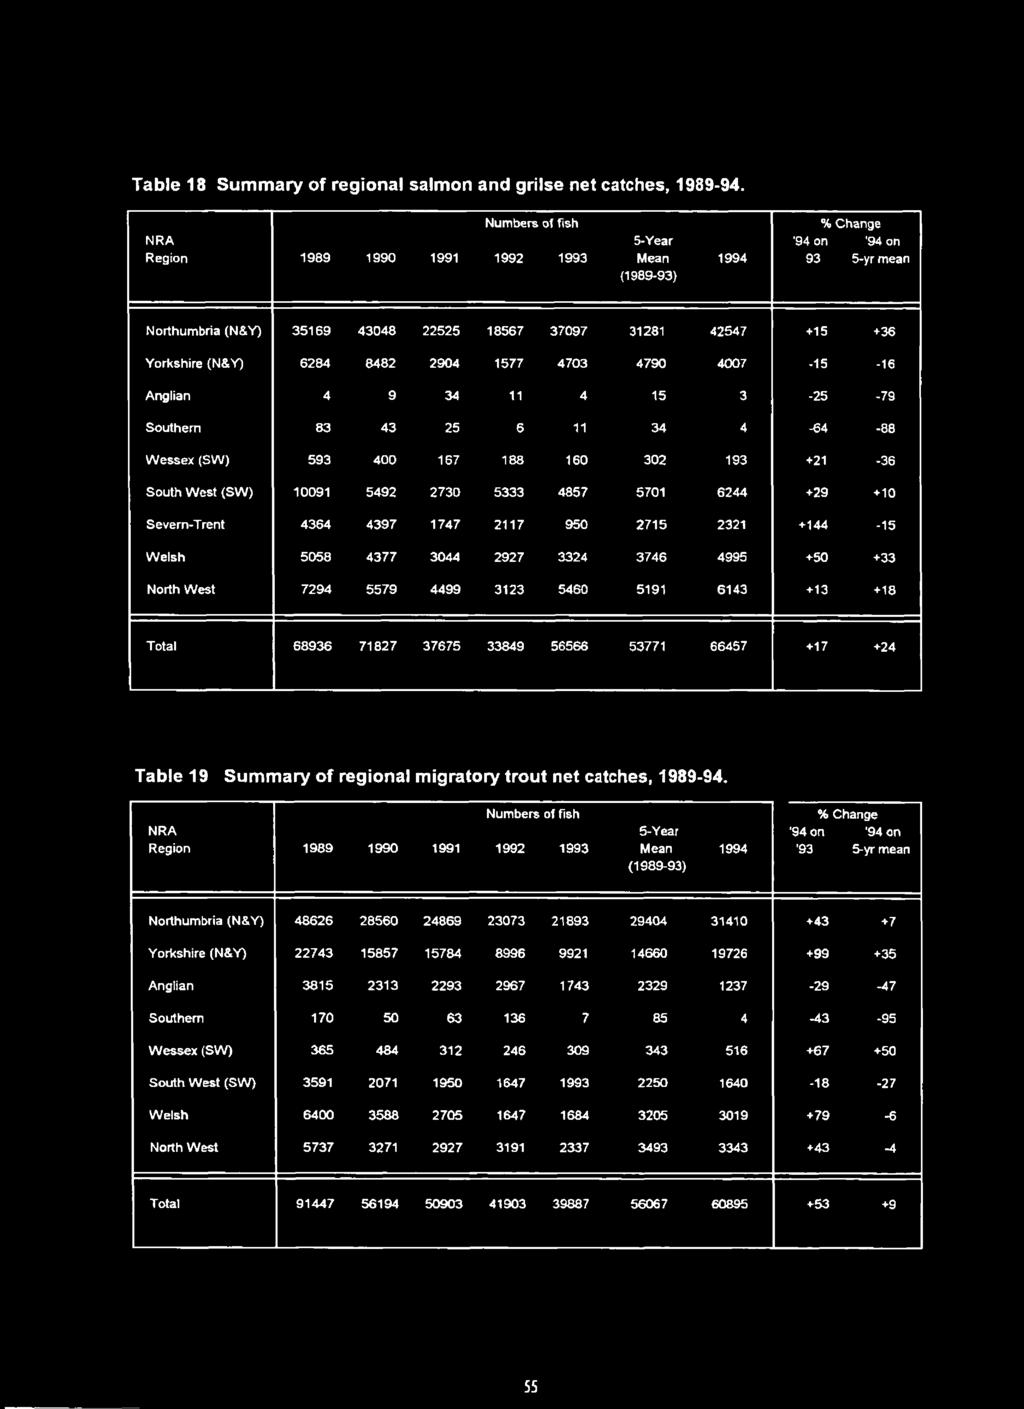 Table 18 Summary of regional salmon and grilse net catches, 1989-94.